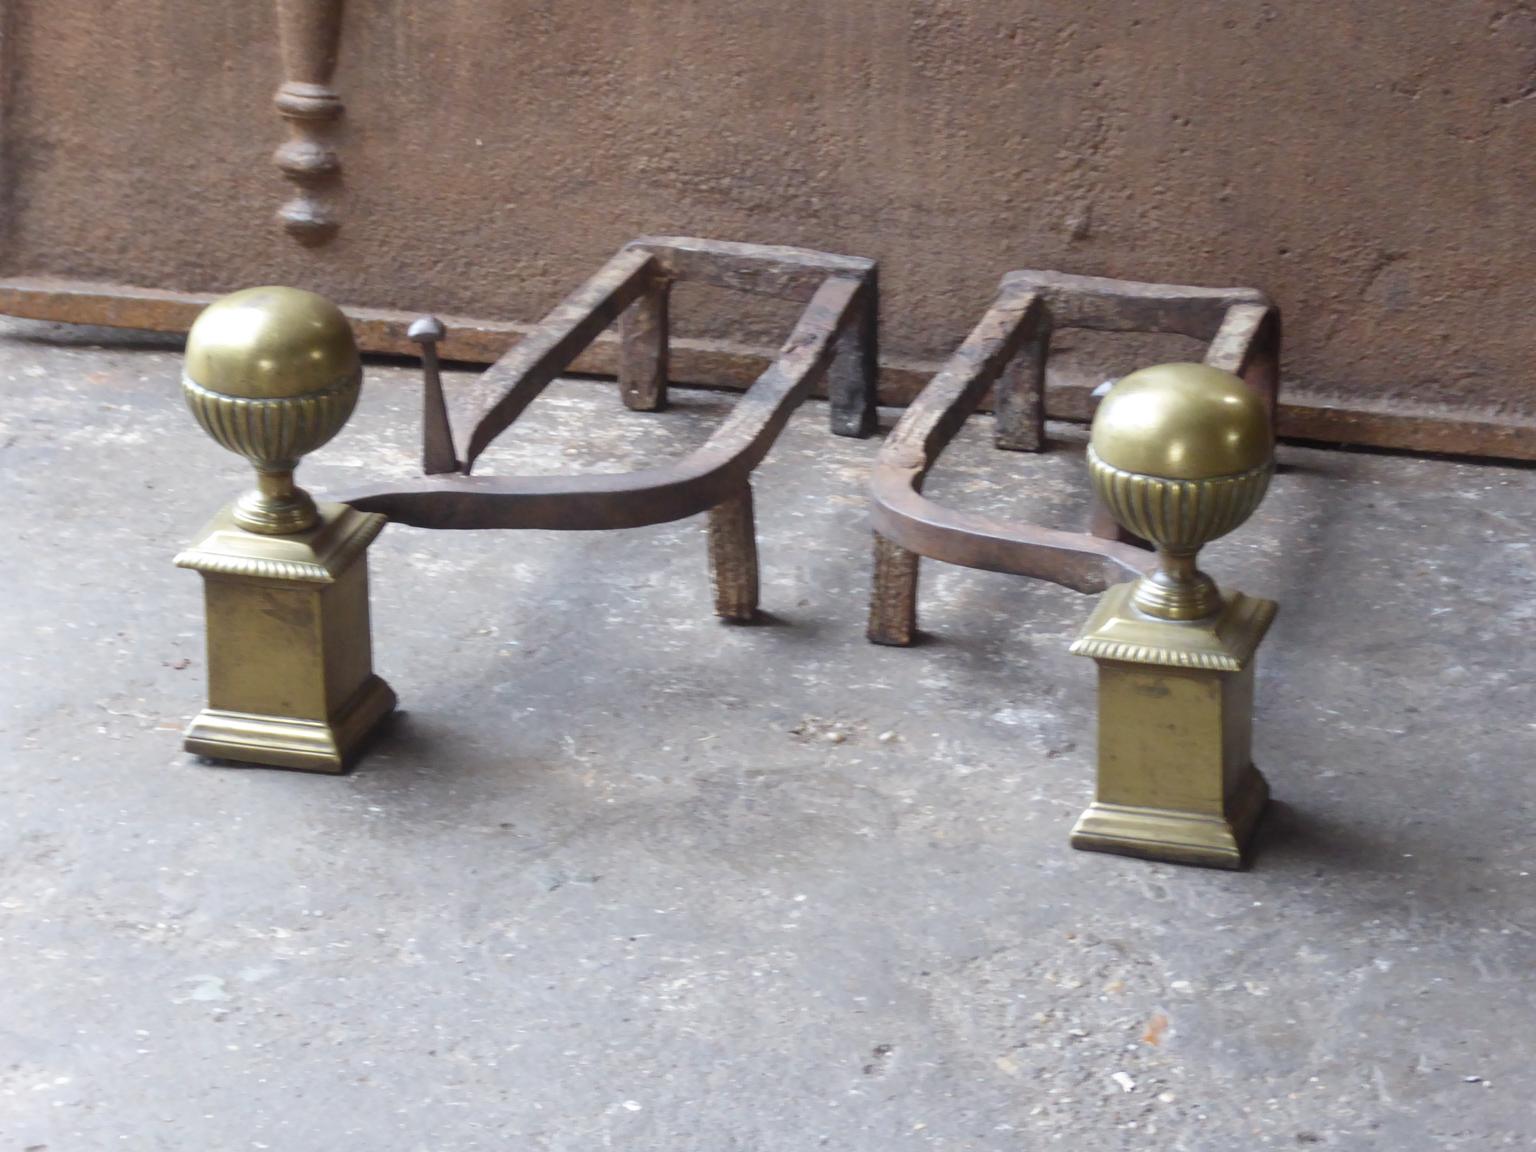 19th century French Napoleon III andirons made of brass and wrought iron. The andirons are in a good condition.